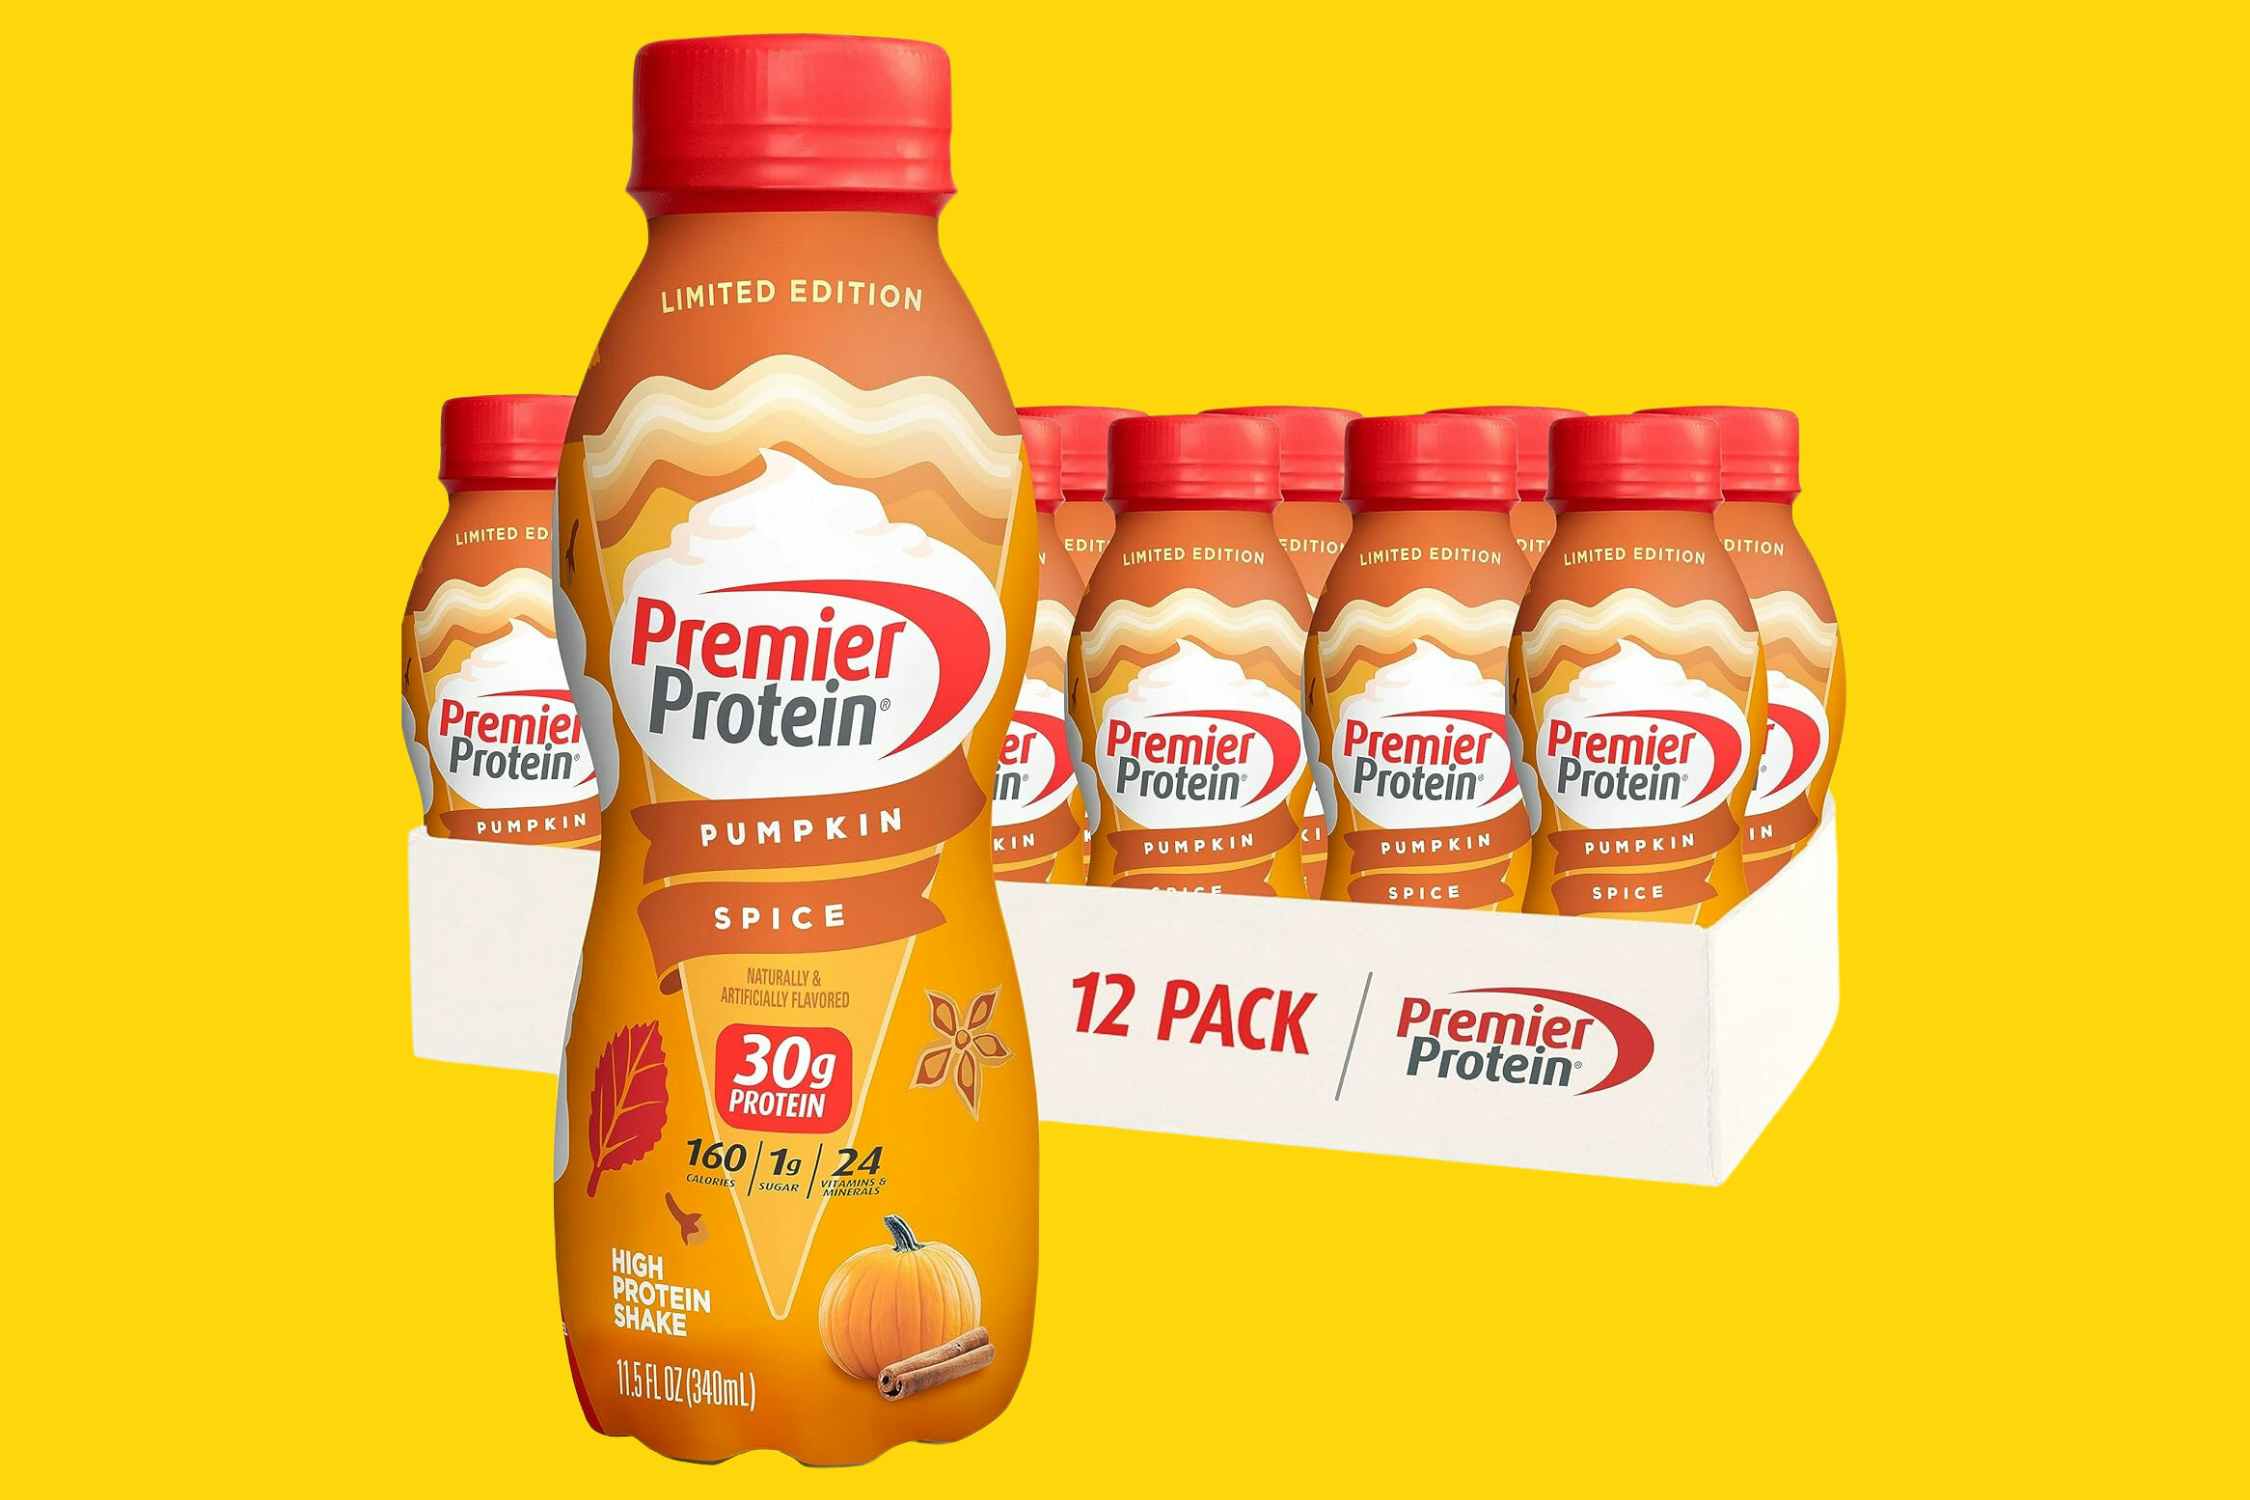 Limited-Edition Premier Protein Shake 12-Pack, as Low as $12.75 on Amazon